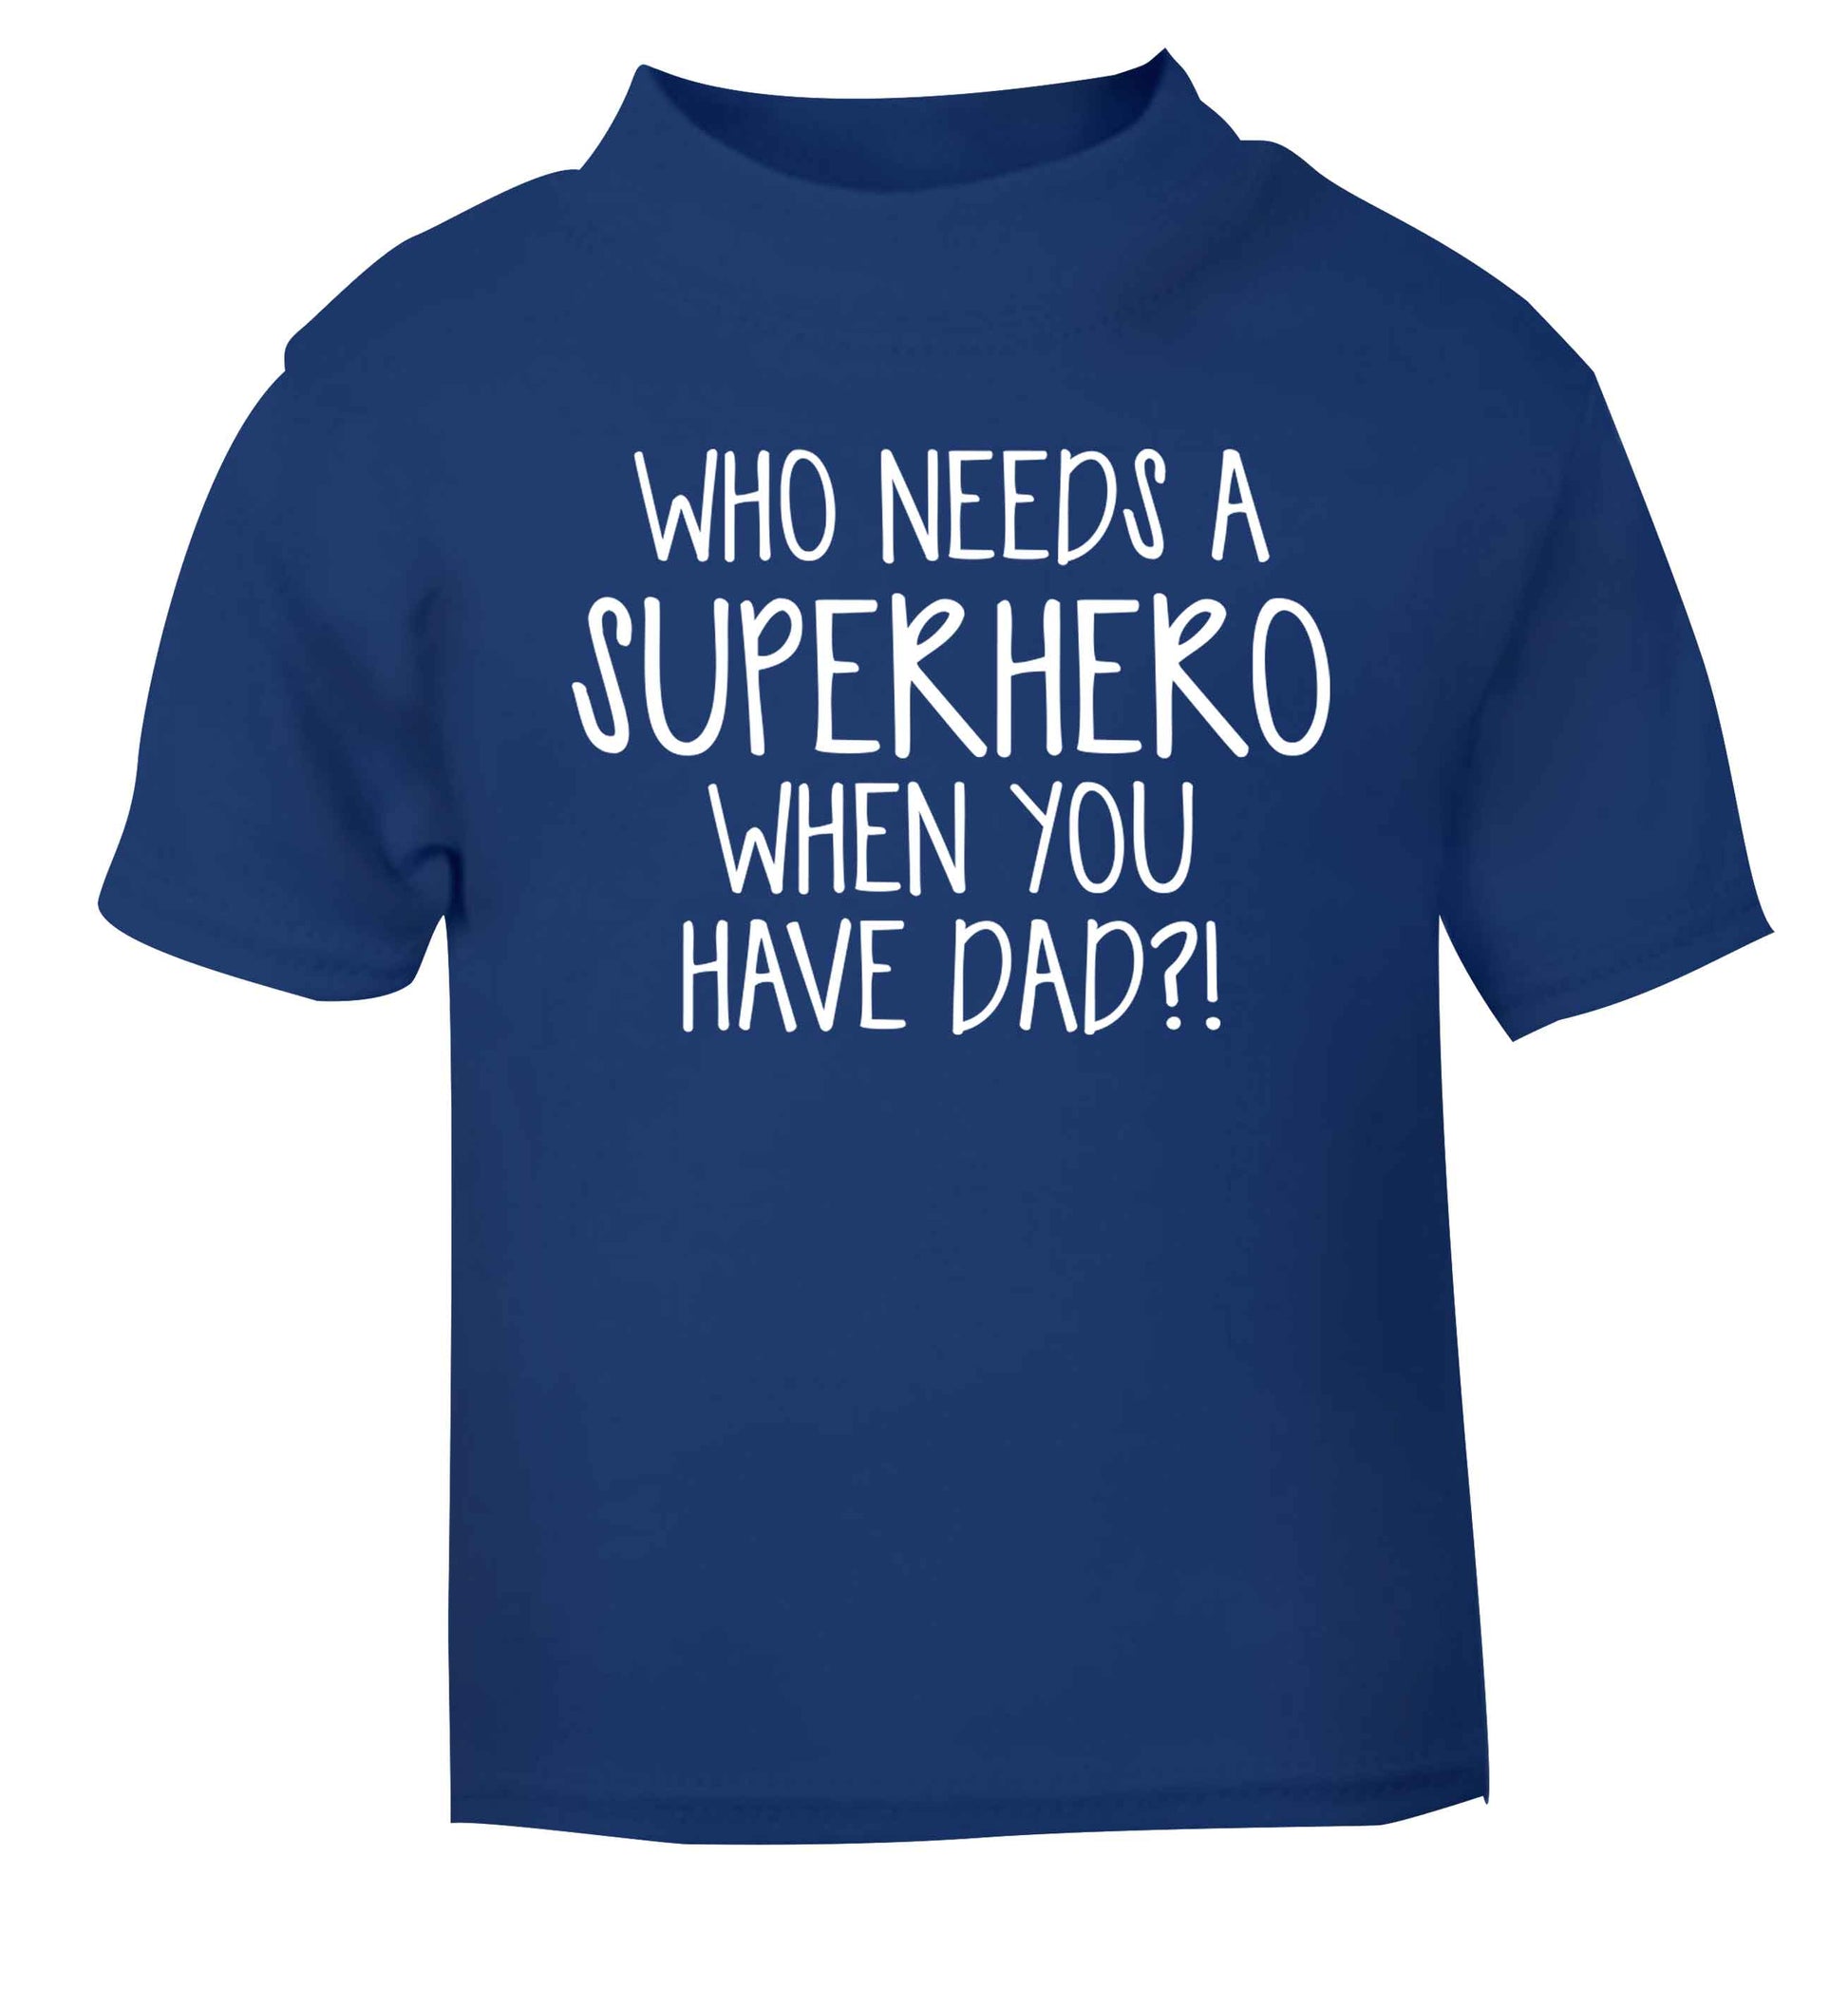 Who needs a superhero when you have dad! blue baby toddler Tshirt 2 Years